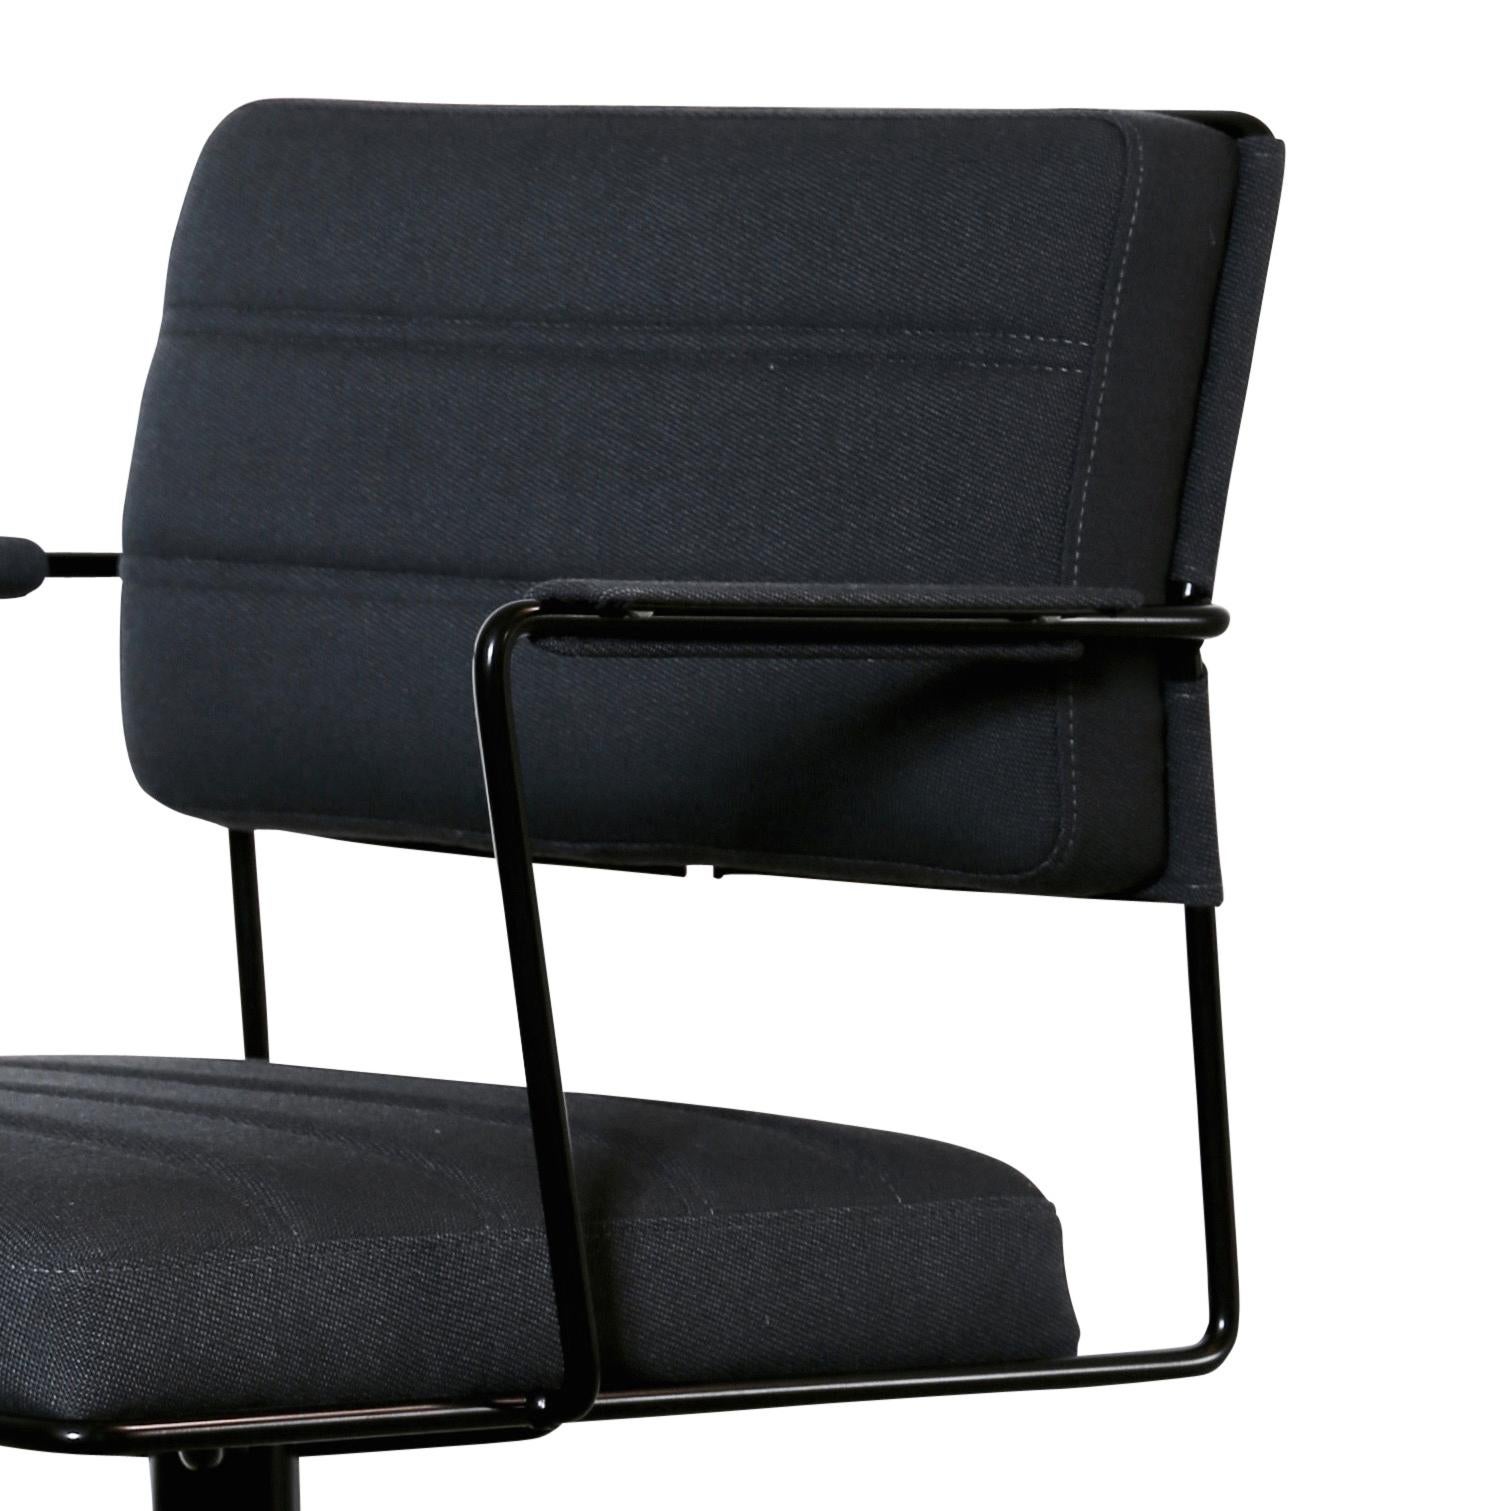 Danish Henrik Tengler, HT 2012 Black Upholstery Time Chair by One Collection